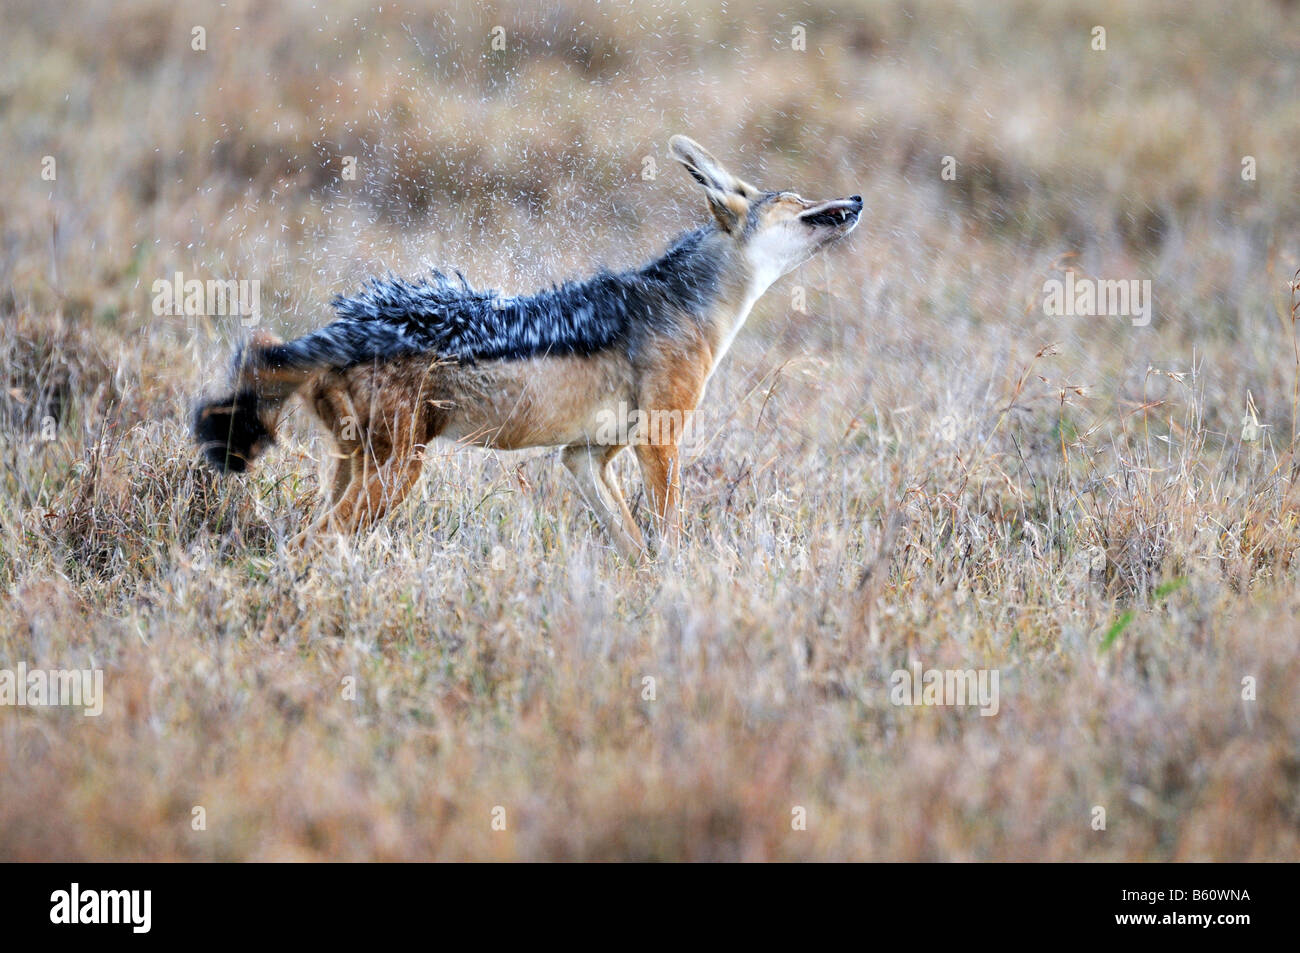 Black-backed Jackal (Canis mesomelas) shaking water off its fur, Sweetwater Game Reserve, Kenya, East Africa, Africa Stock Photo